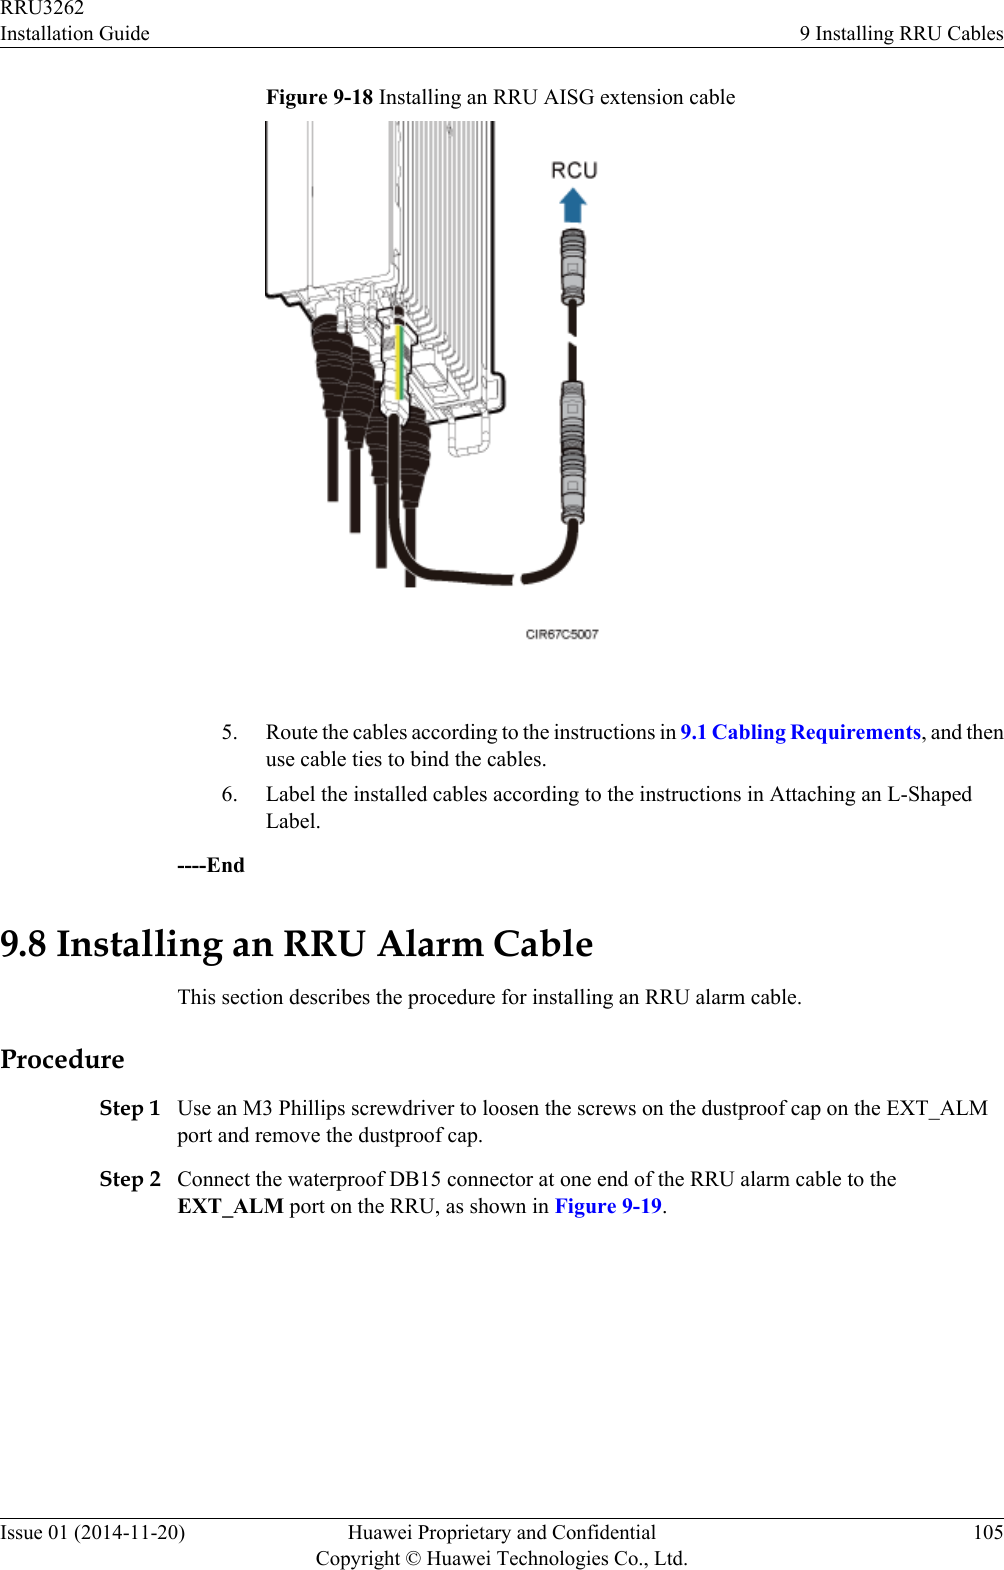 Figure 9-18 Installing an RRU AISG extension cable 5. Route the cables according to the instructions in 9.1 Cabling Requirements, and thenuse cable ties to bind the cables.6. Label the installed cables according to the instructions in Attaching an L-ShapedLabel.----End9.8 Installing an RRU Alarm CableThis section describes the procedure for installing an RRU alarm cable.ProcedureStep 1 Use an M3 Phillips screwdriver to loosen the screws on the dustproof cap on the EXT_ALMport and remove the dustproof cap.Step 2 Connect the waterproof DB15 connector at one end of the RRU alarm cable to theEXT_ALM port on the RRU, as shown in Figure 9-19.RRU3262Installation Guide 9 Installing RRU CablesIssue 01 (2014-11-20) Huawei Proprietary and ConfidentialCopyright © Huawei Technologies Co., Ltd.105